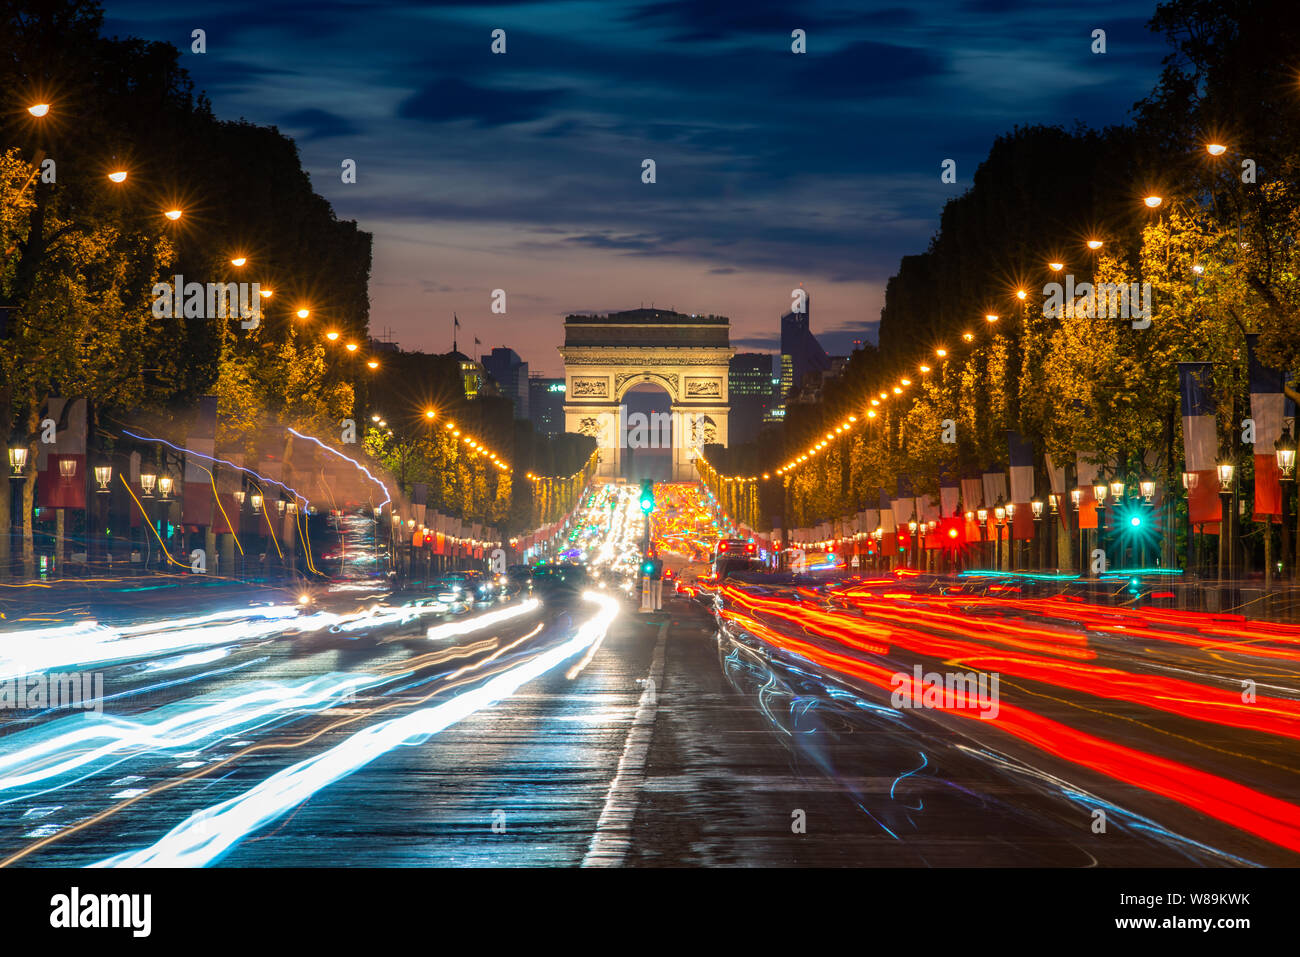 Night scence illuminations traffic street of the Impressive Arc de Triomphe Paris along the famous tree lined Avenue des Champs-Elysees in Paris, Fran Stock Photo